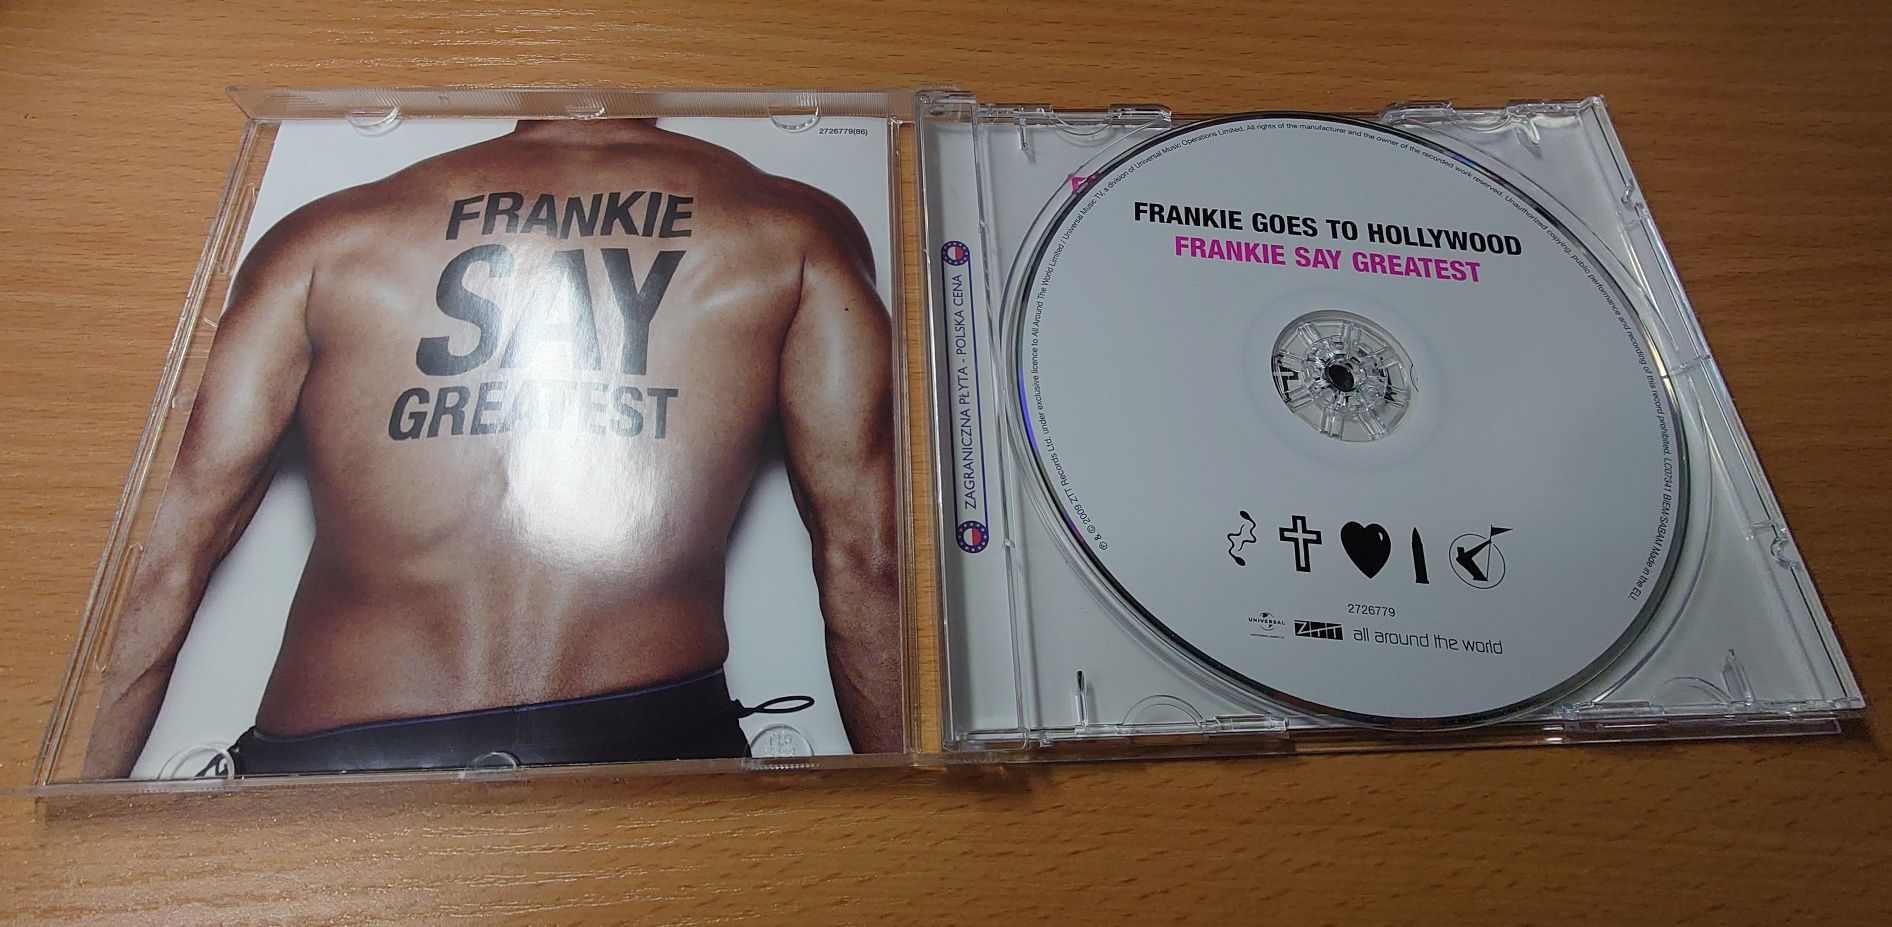 CD Frankie Say Greatest Goes to Hollywood album Relax dance disco pop